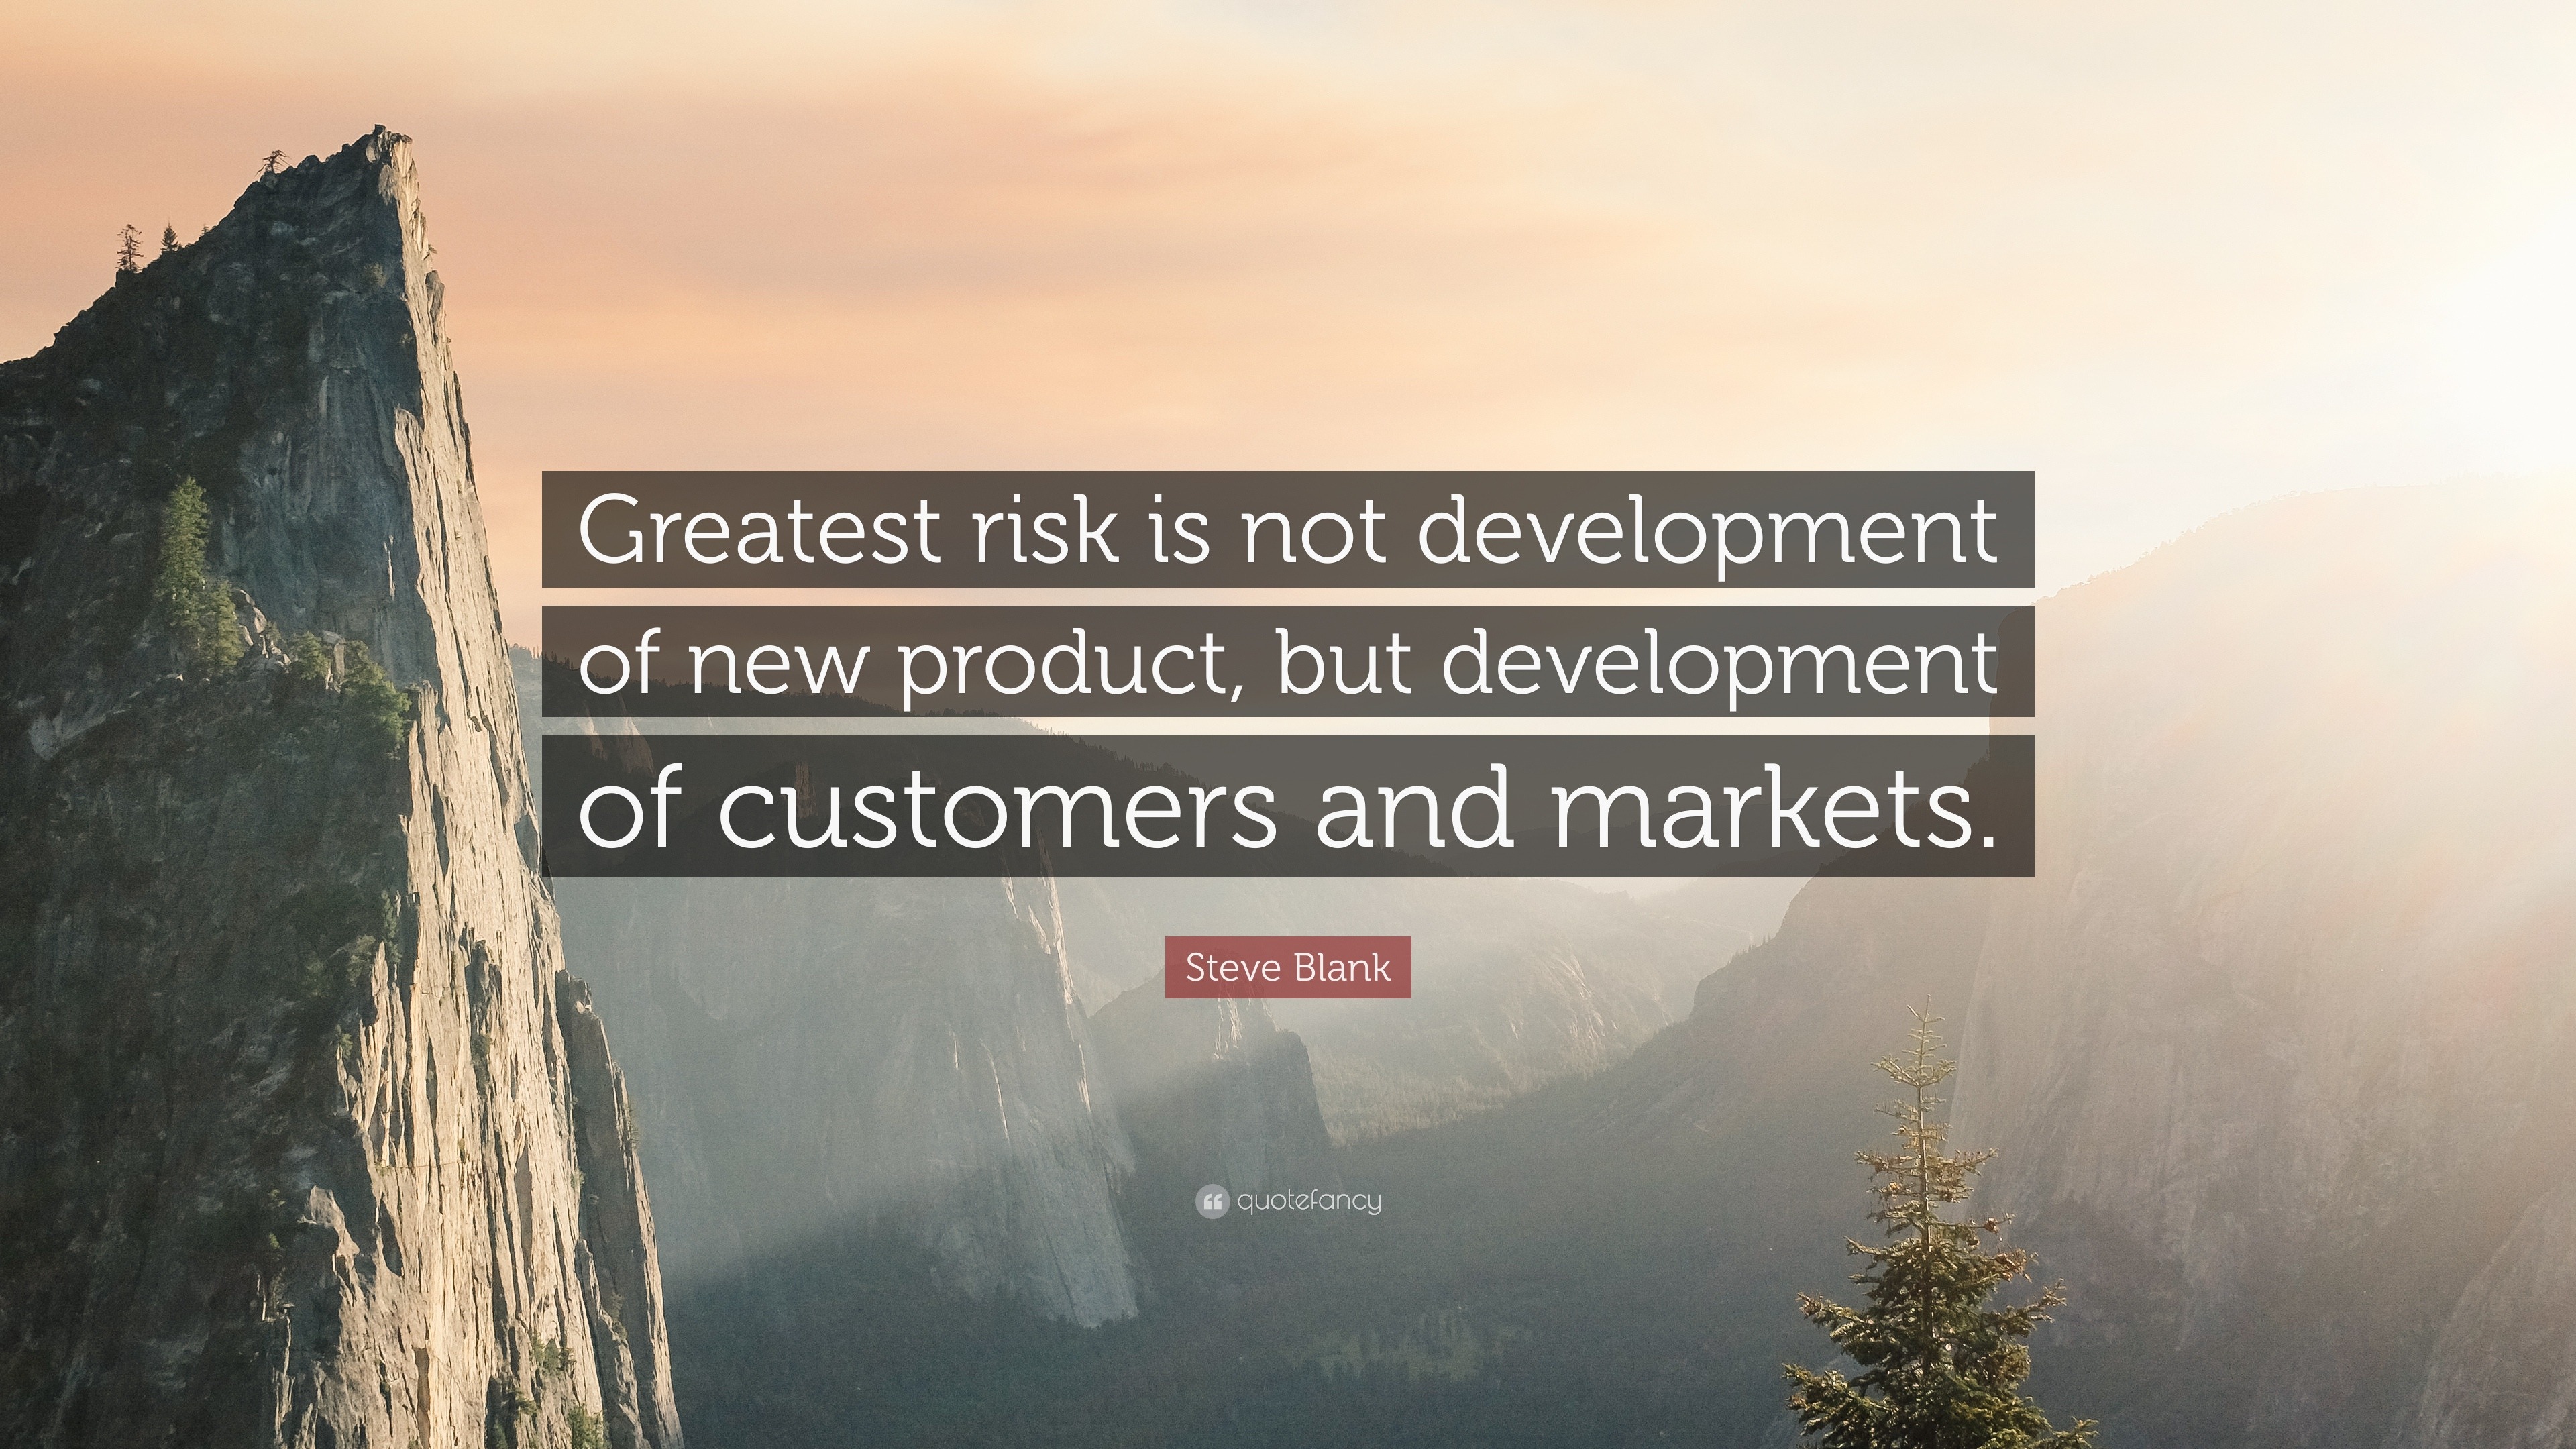 Top 100 Quotes & Sayings About Product Development